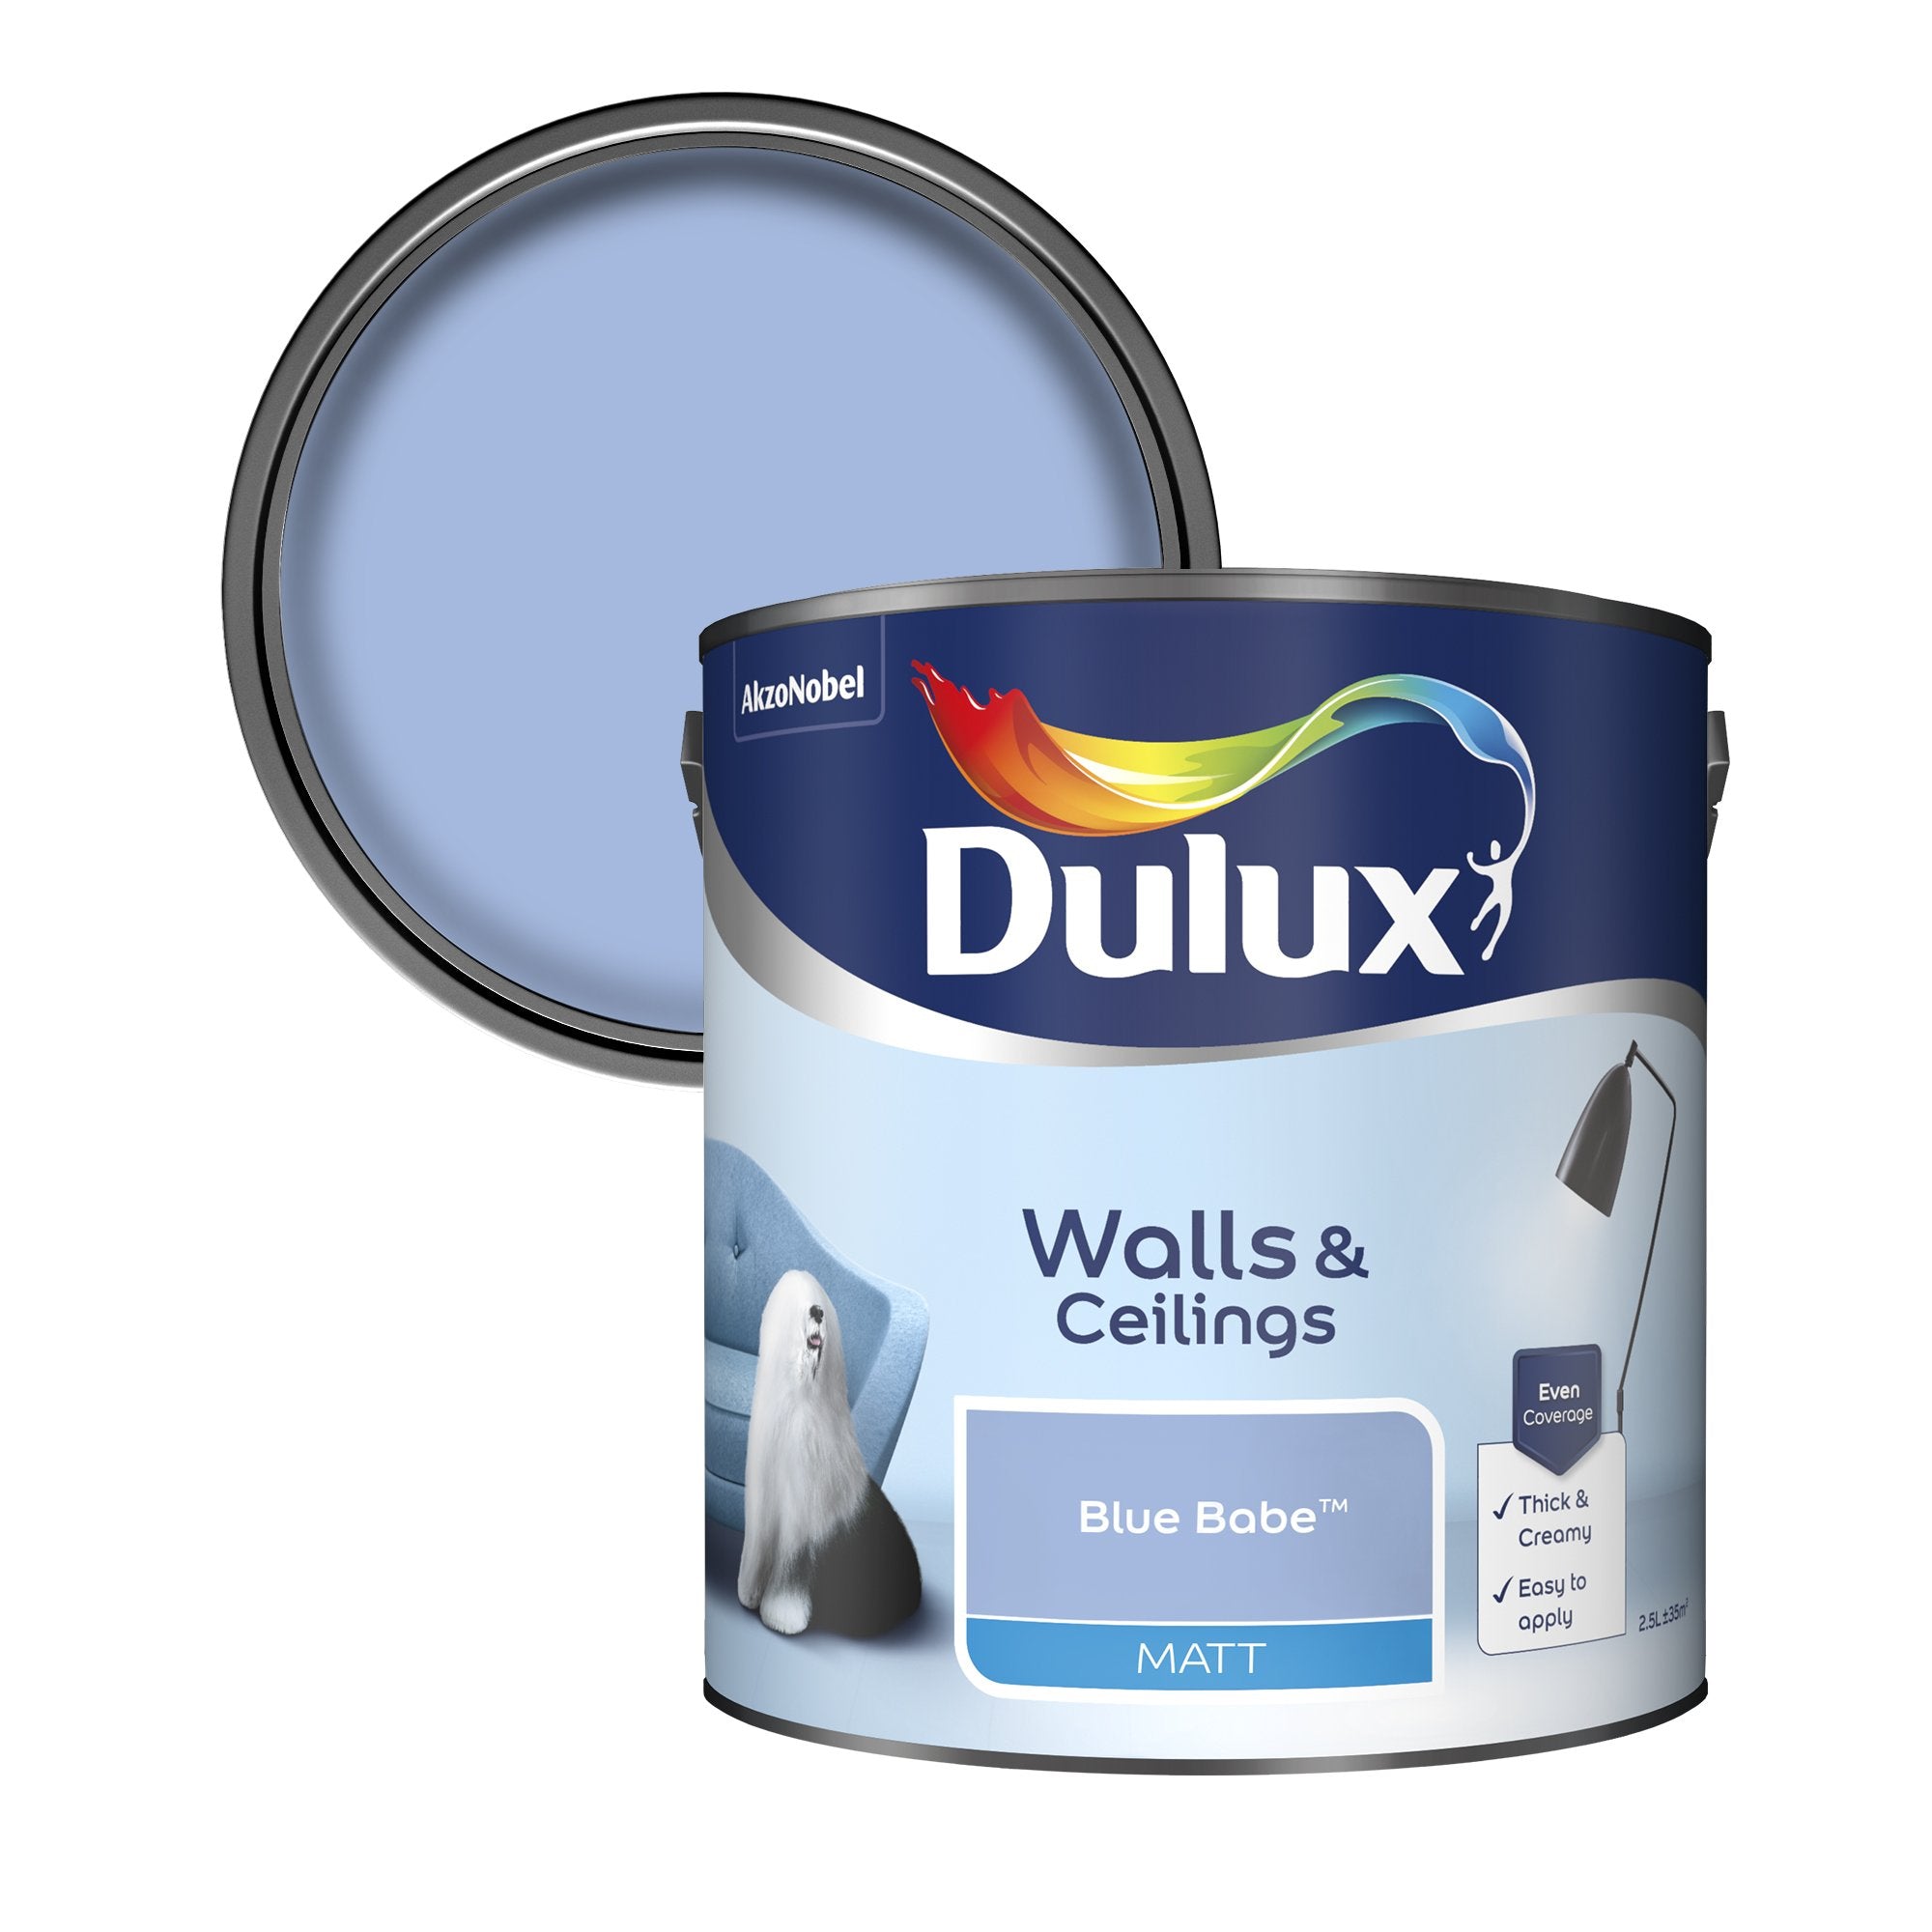 Dulux-Matt-Emulsion-Paint-For-Walls-And-Ceilings-Blue-Babe-2.5L